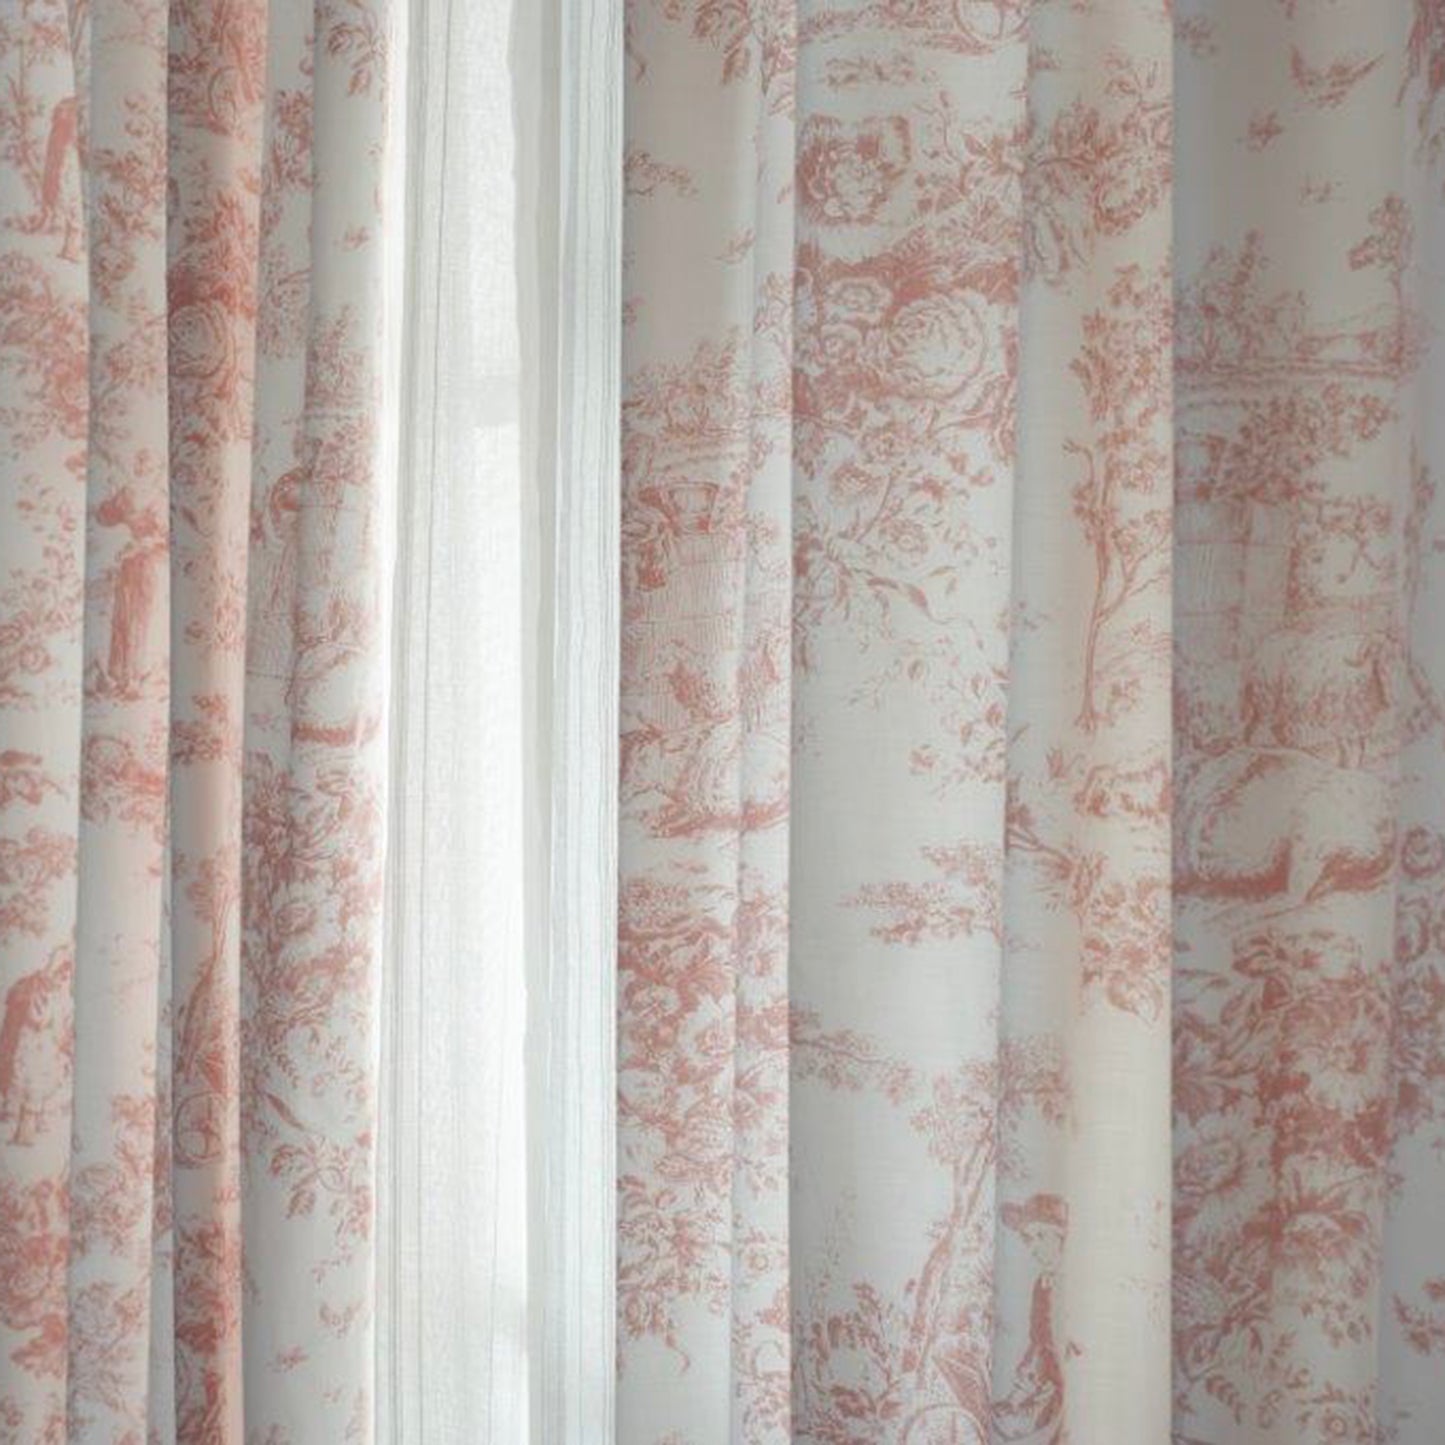 The Lyndon Company Toile Pink Printed Cotton Pencil Pleat Curtains